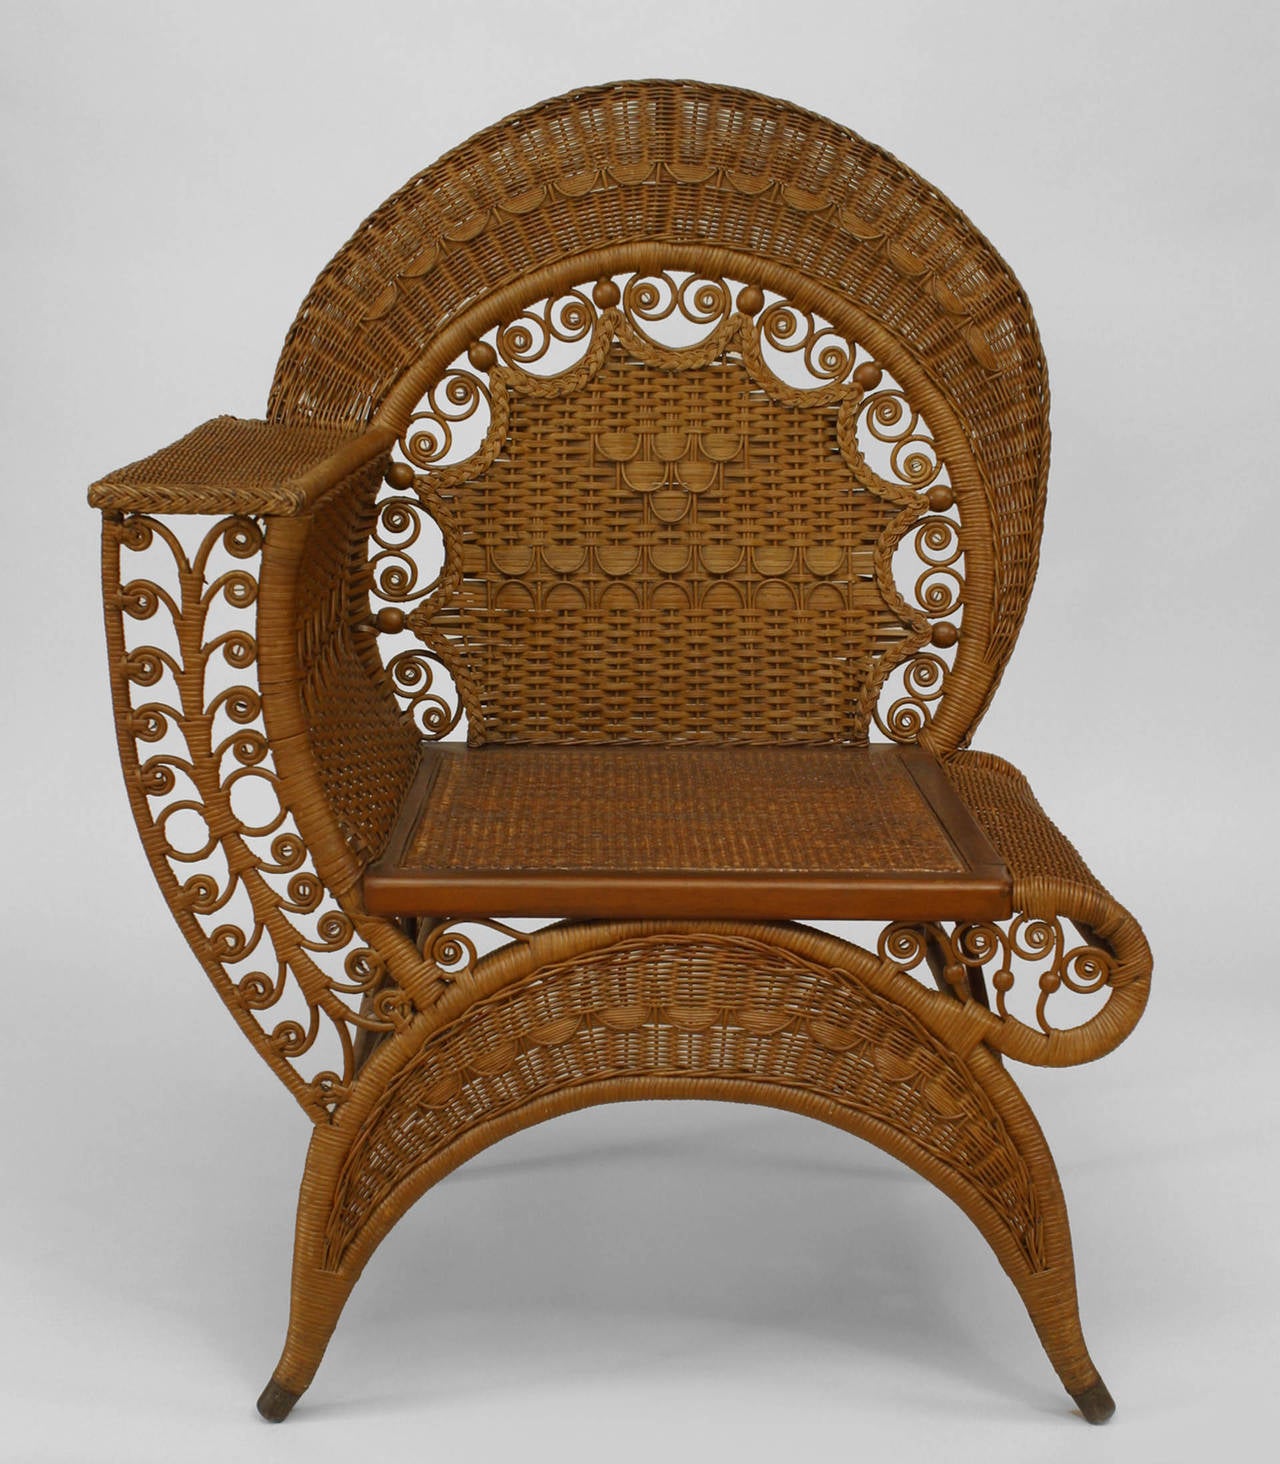 American Victorian natural wicker recamier design photographer's chair with
woven back with festoon design and scroll trim. Bears a Heywood-Wakefield label.